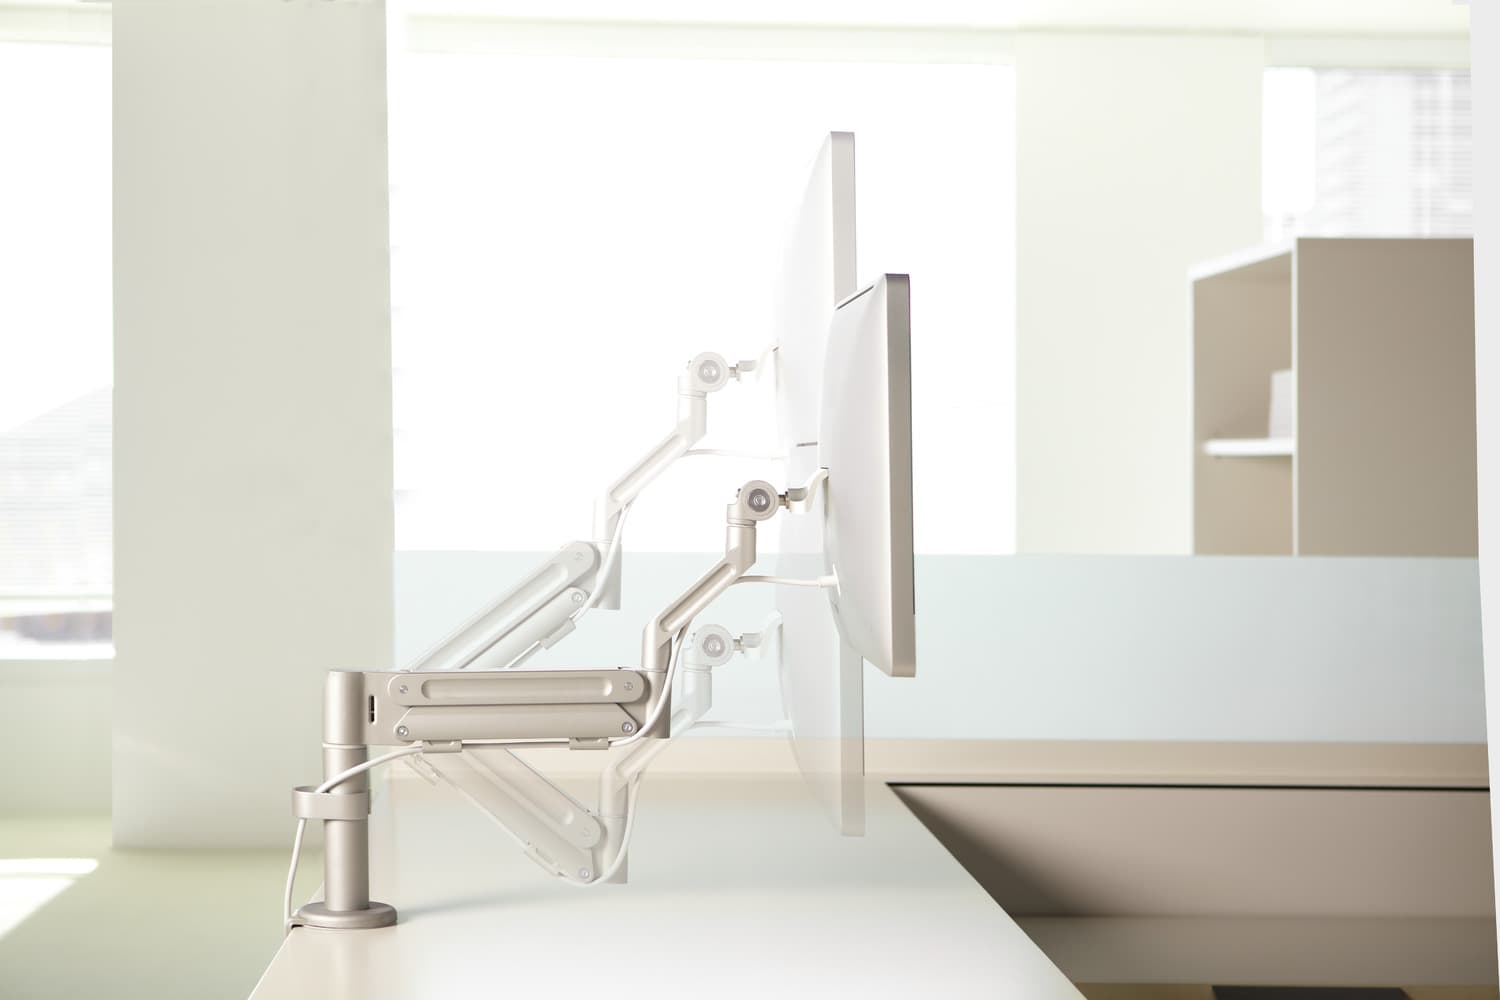 MAST ergonomic monitor support arm by Teknion